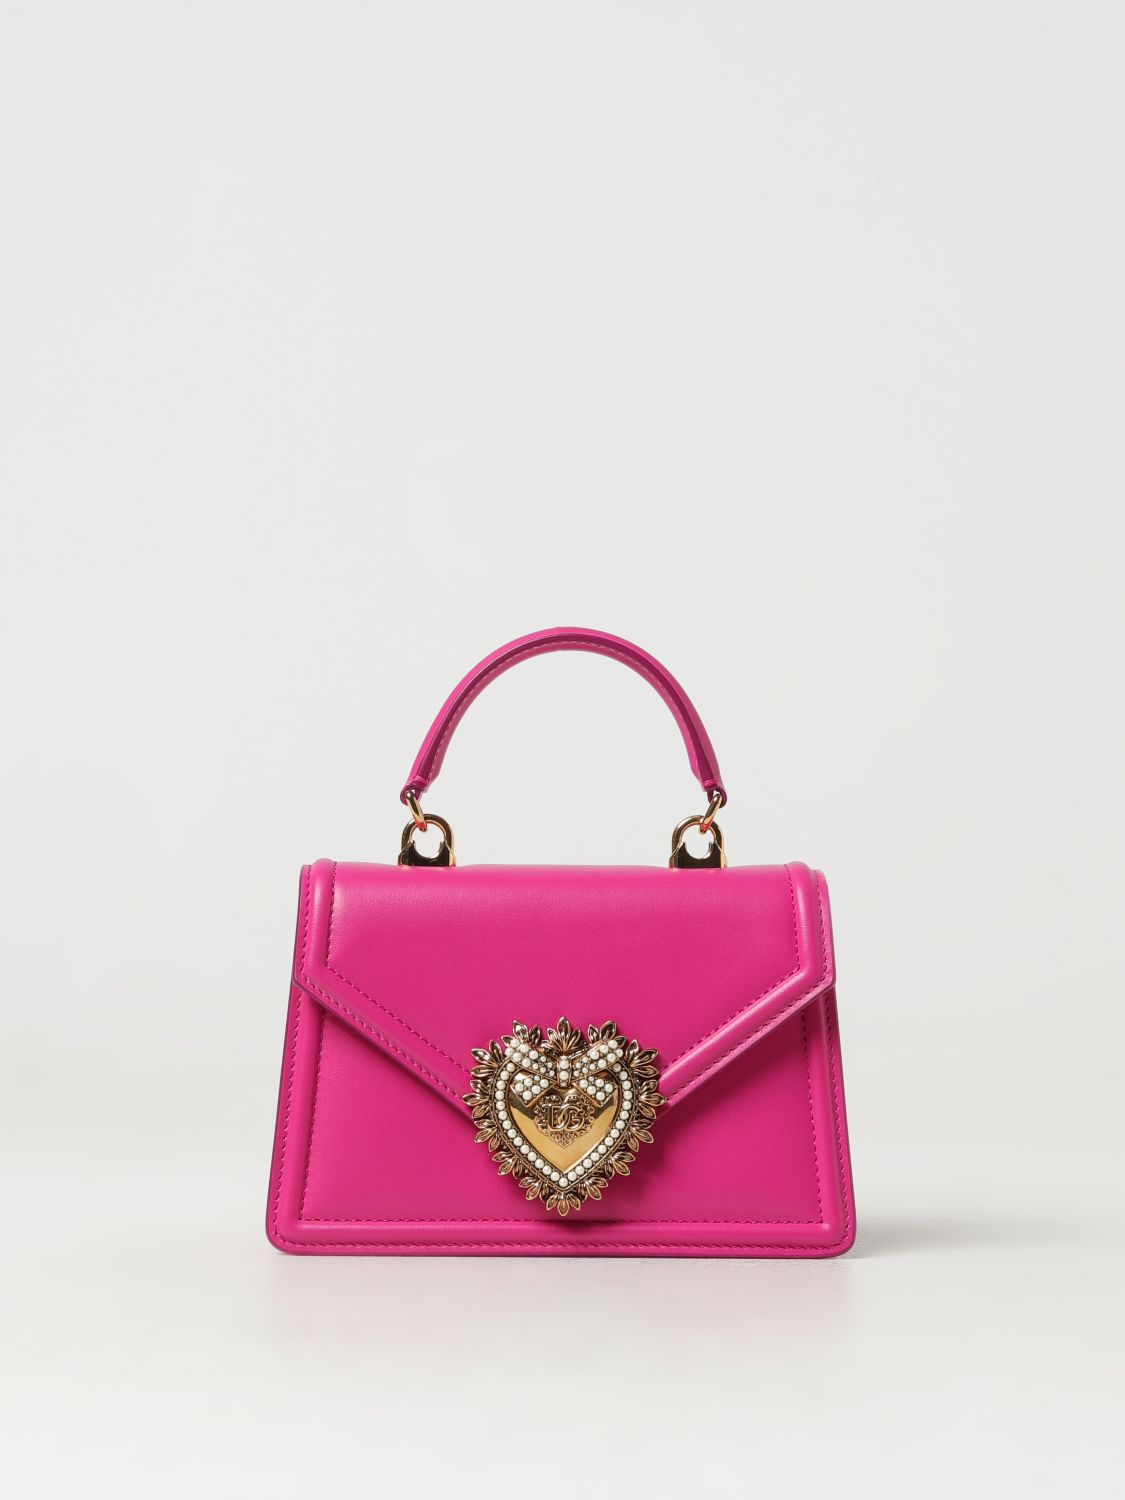 Dolce & Gabbana Devotion Bag In Leather In Pink